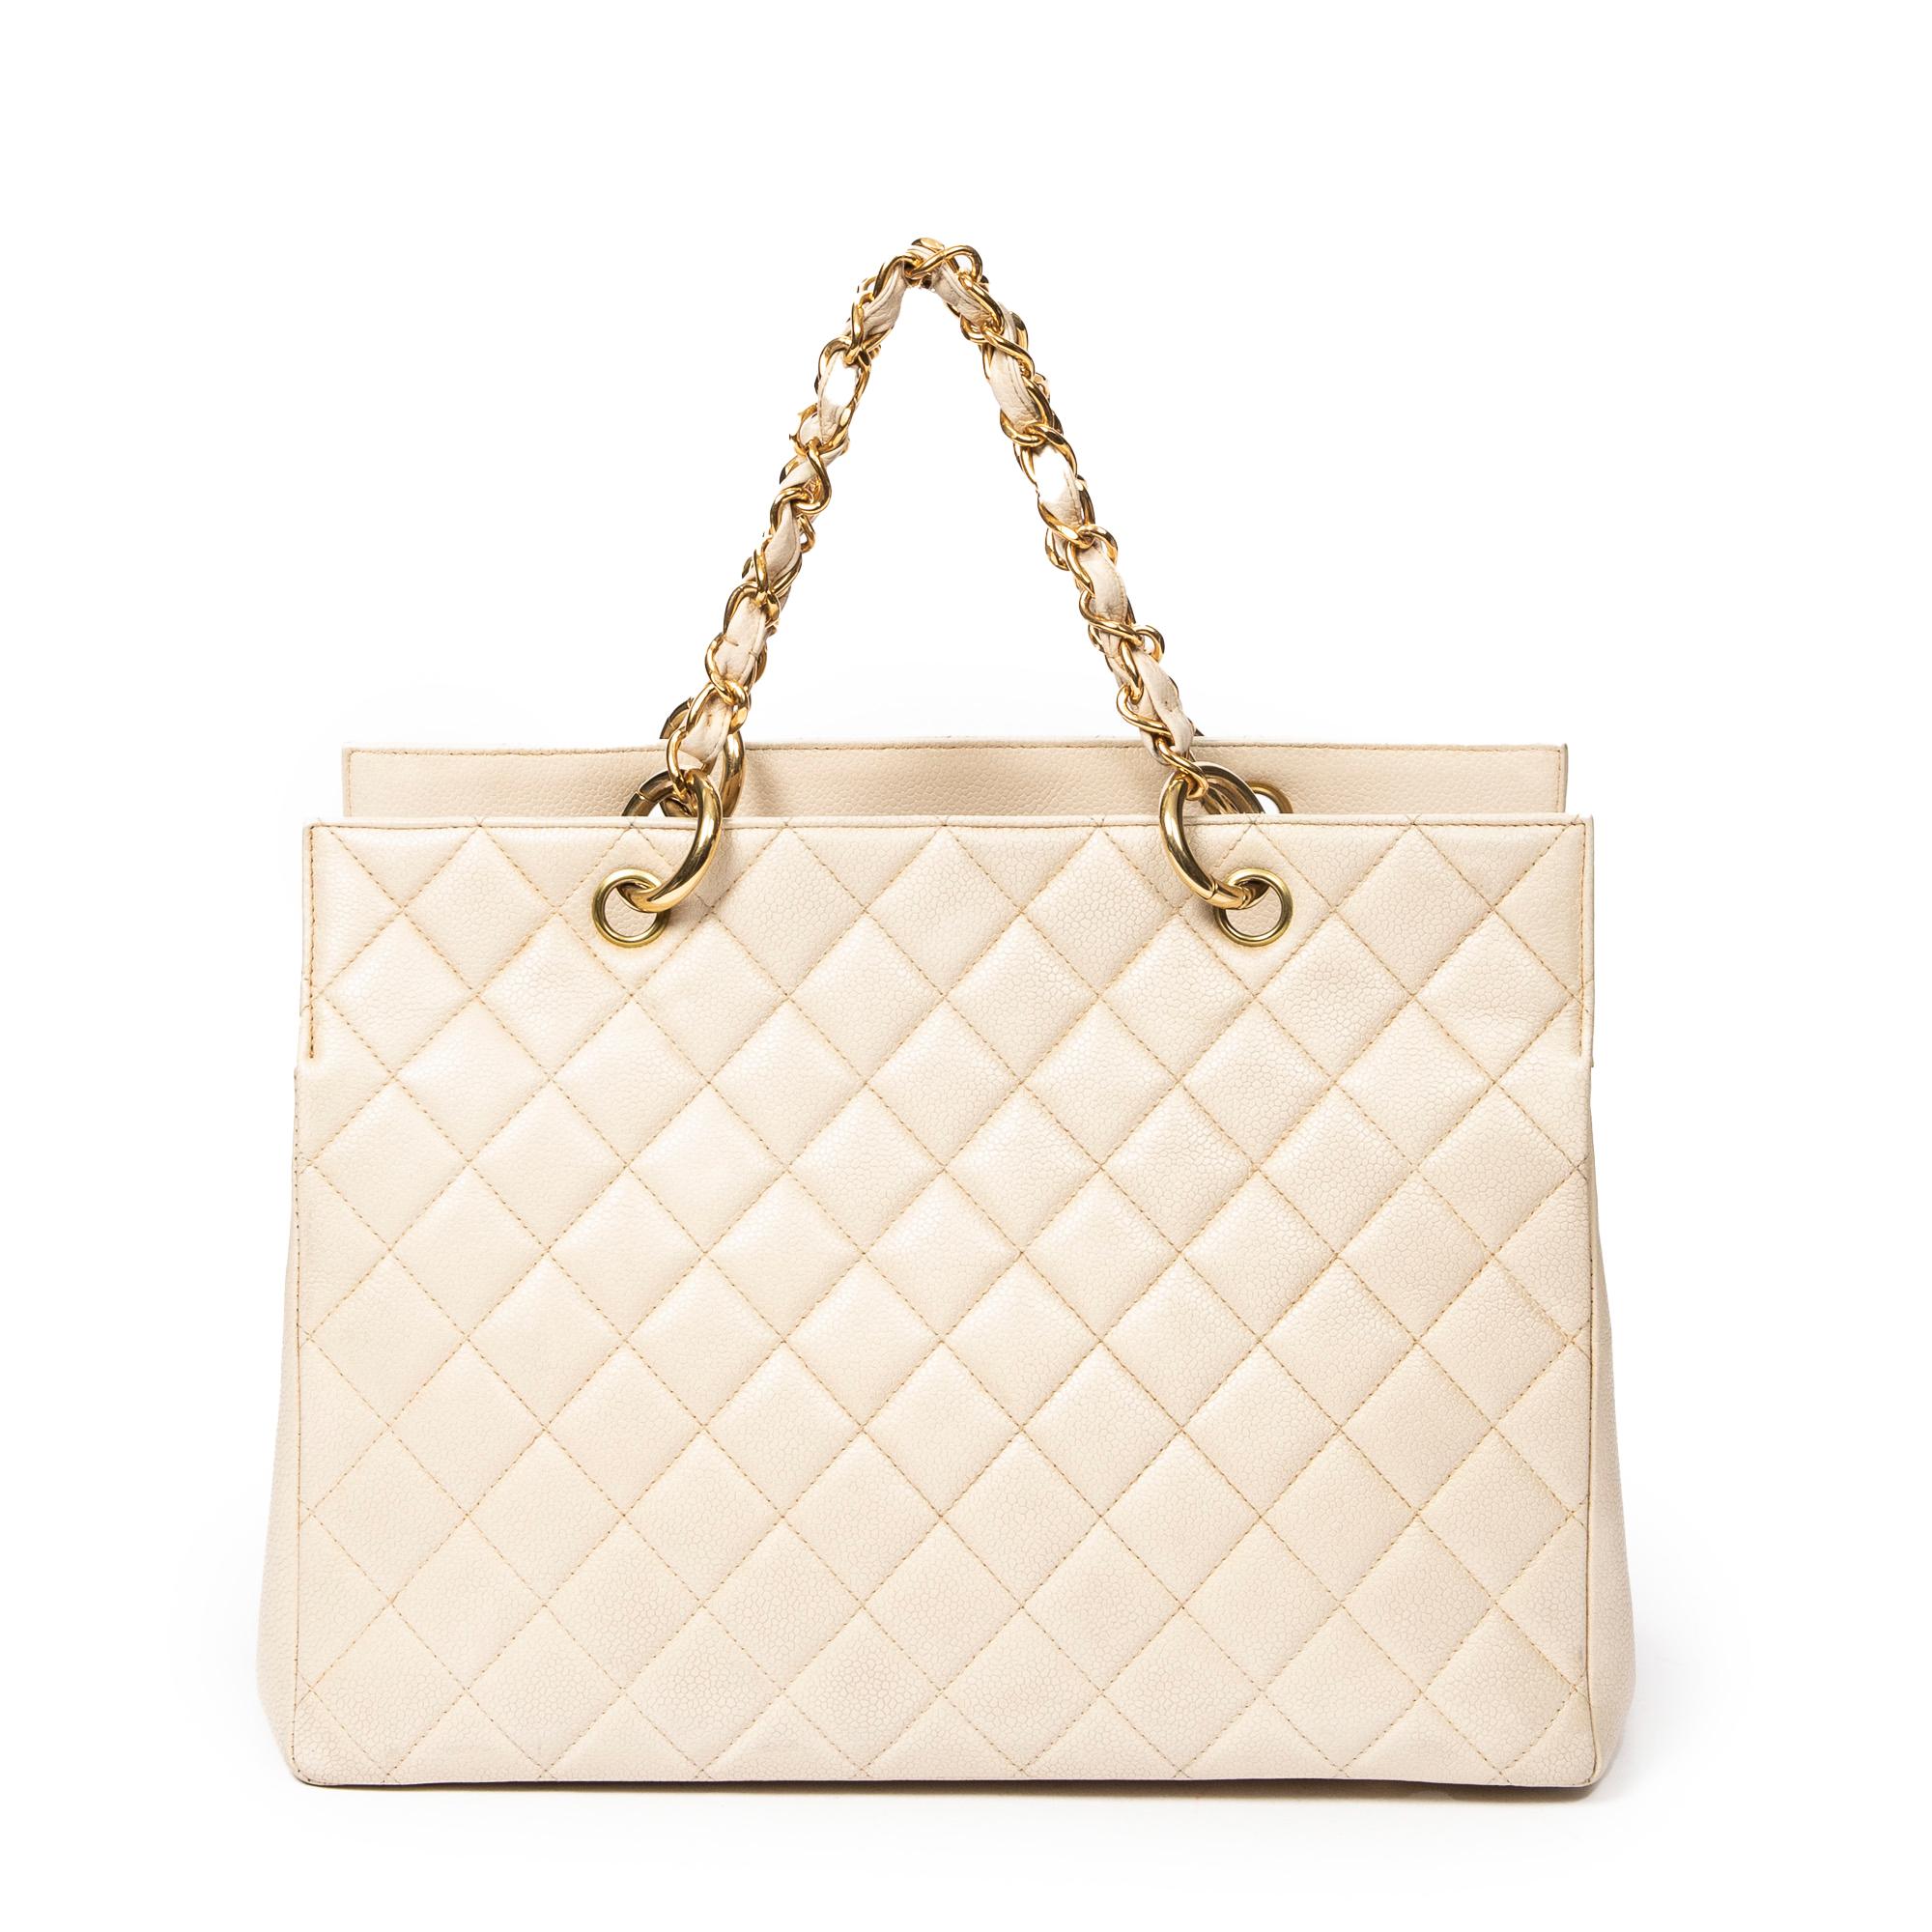 Chanel 1997 Ivory Small Shopping Tote In Excellent Condition For Sale In Atlanta, GA